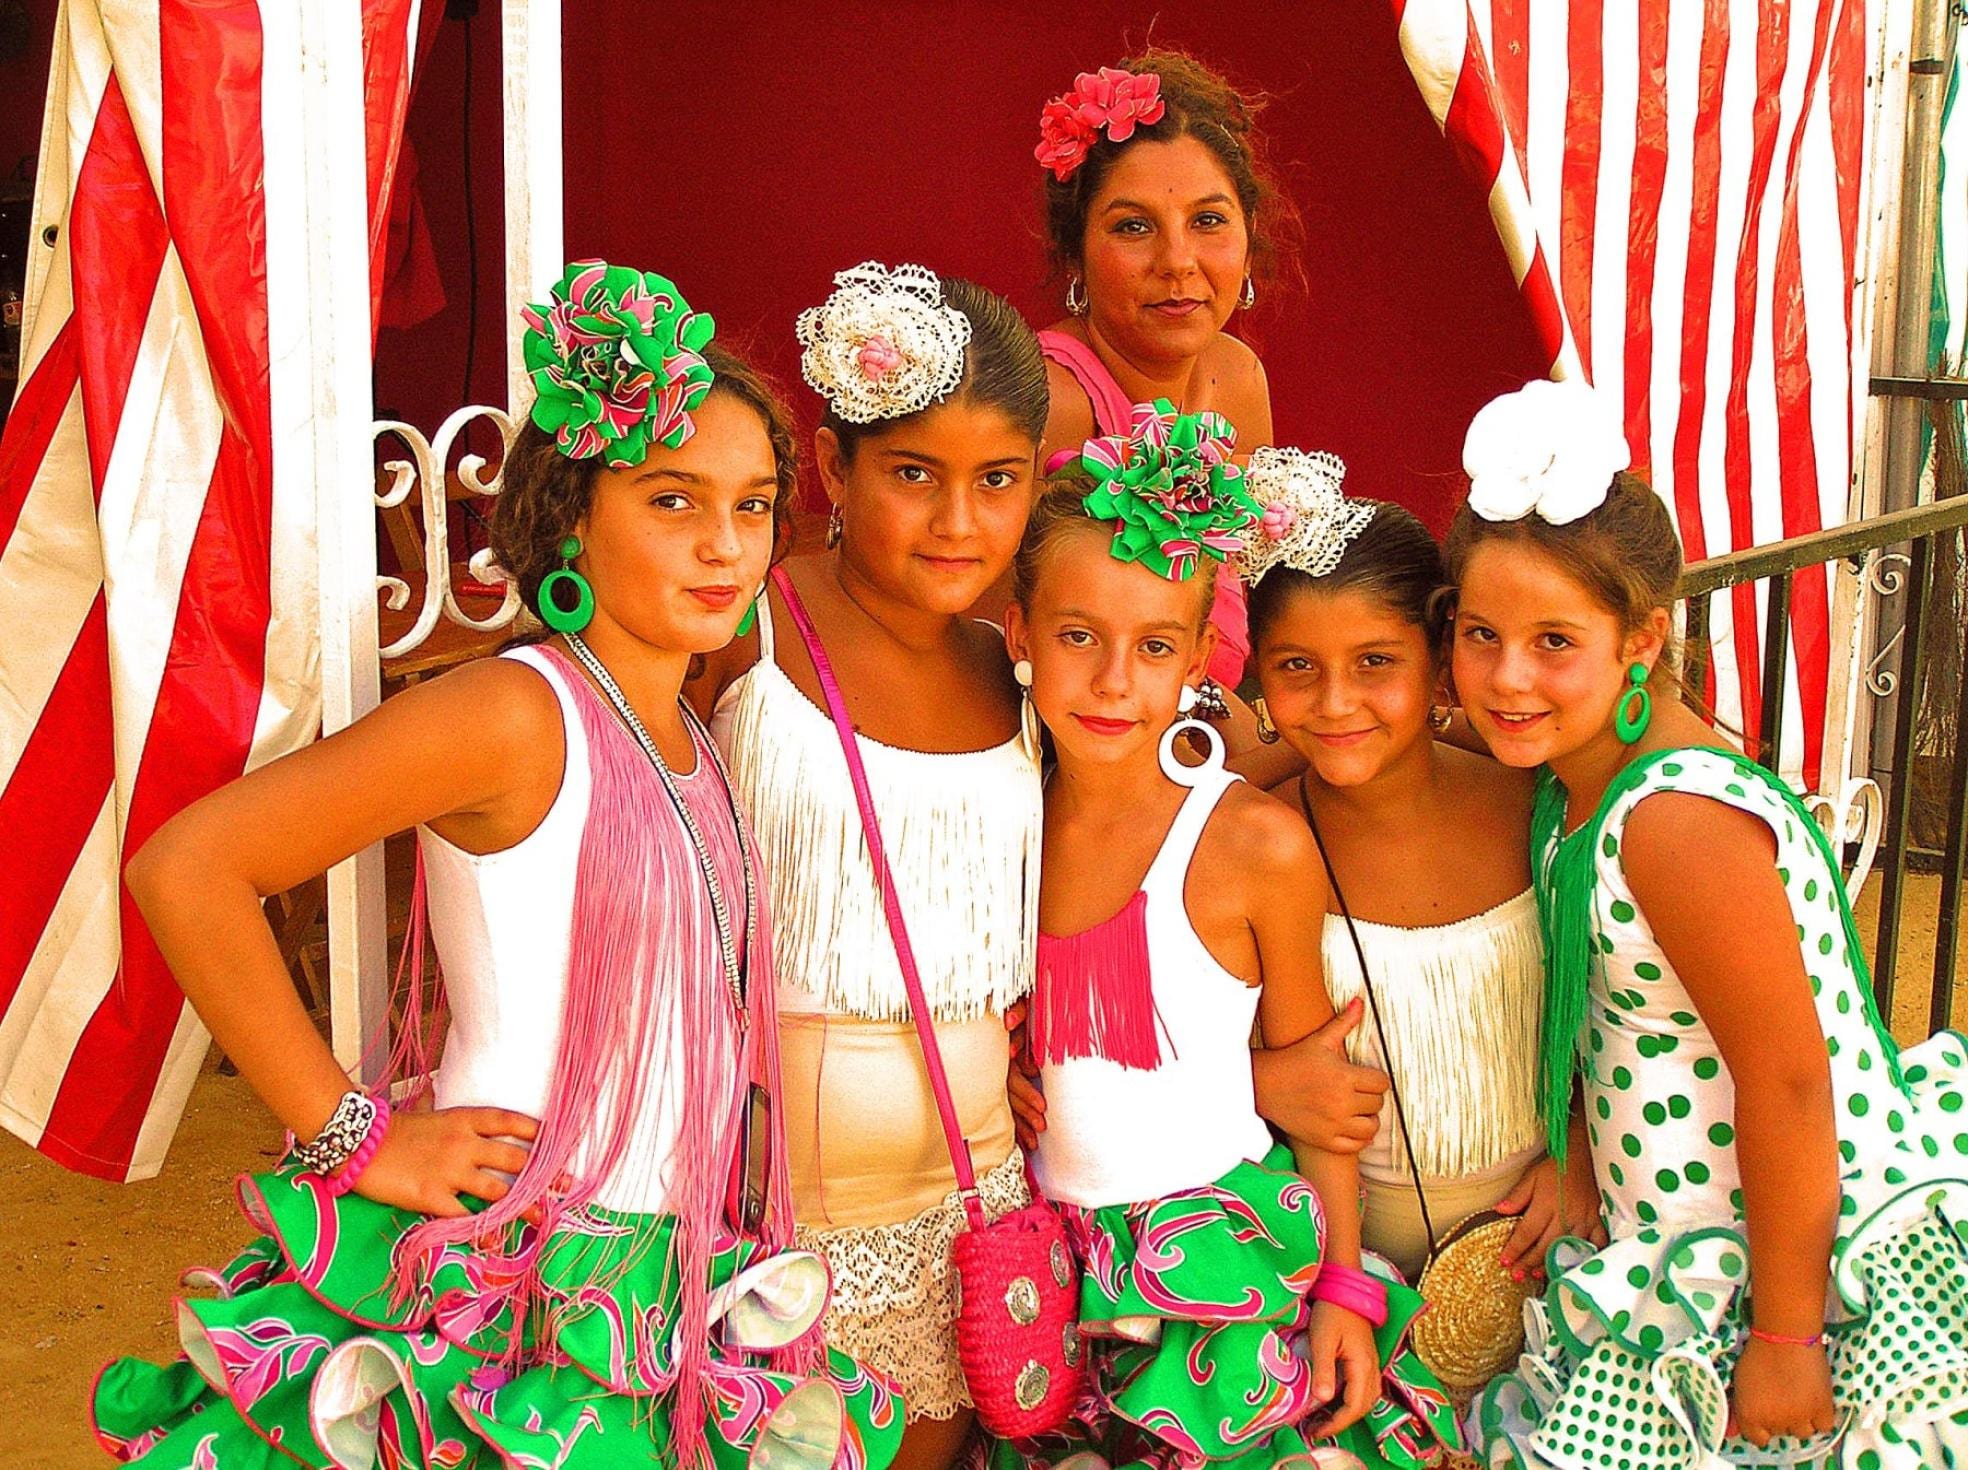  Gypsies have madea large contribution to the culture and history of Andalucía. 